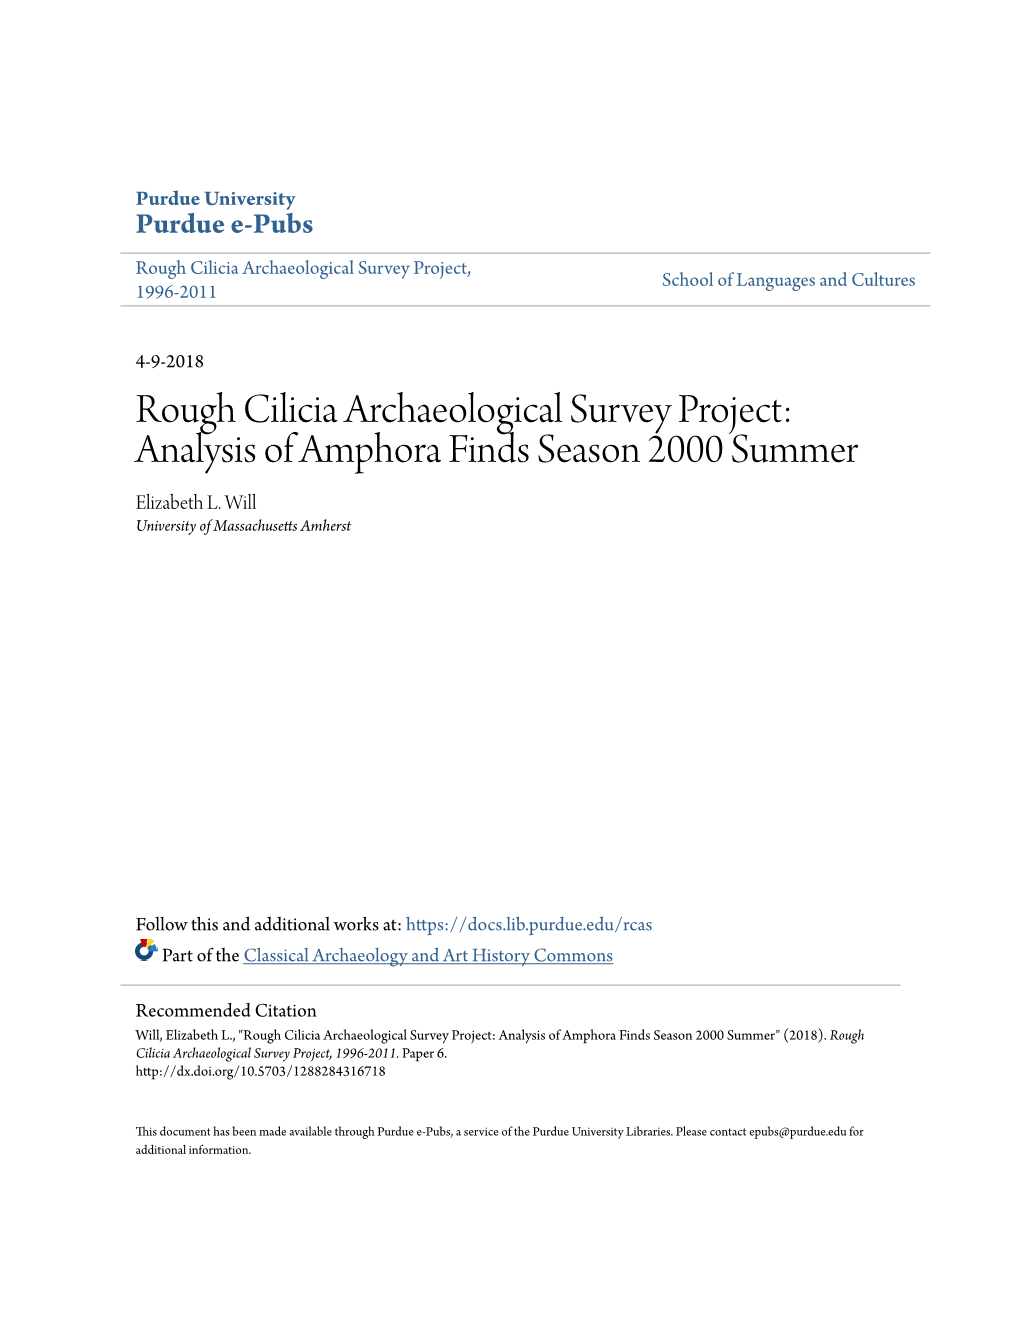 Rough Cilicia Archaeological Survey Project: Analysis of Amphora Finds Season 2000 Summer Elizabeth L